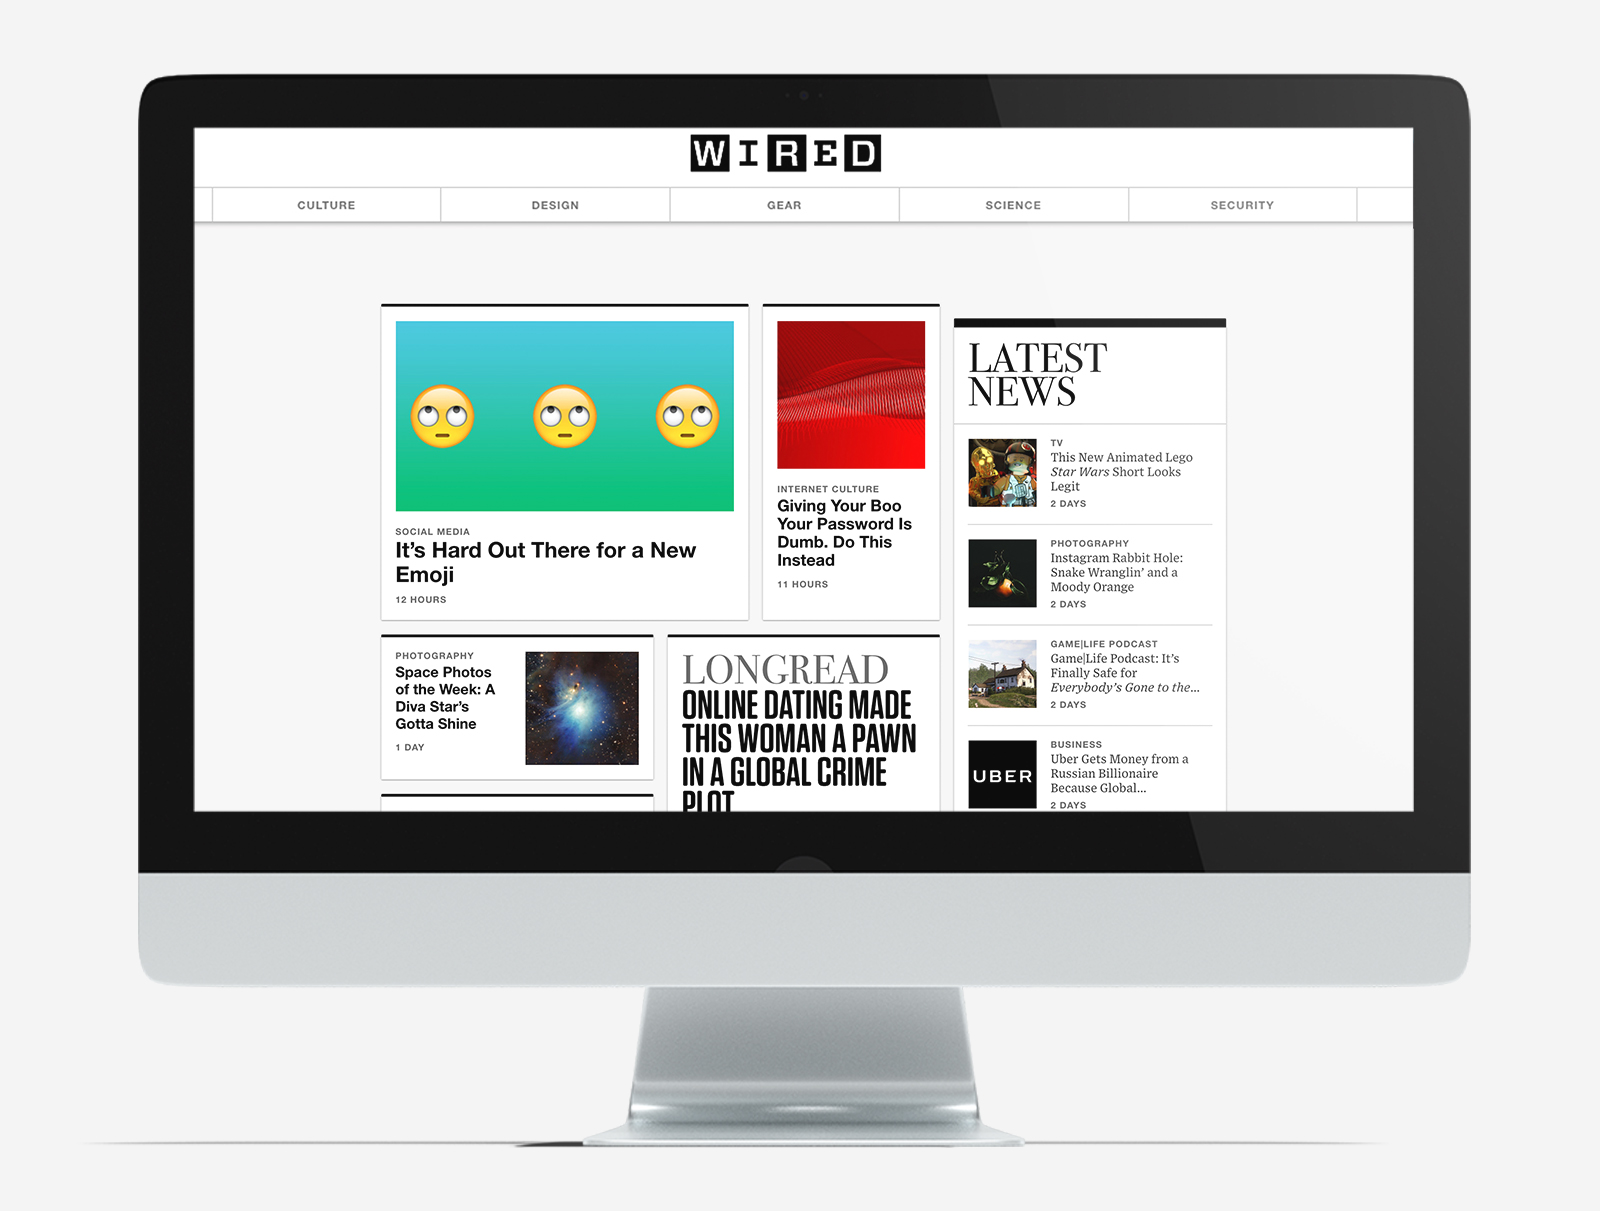 The Wired Website